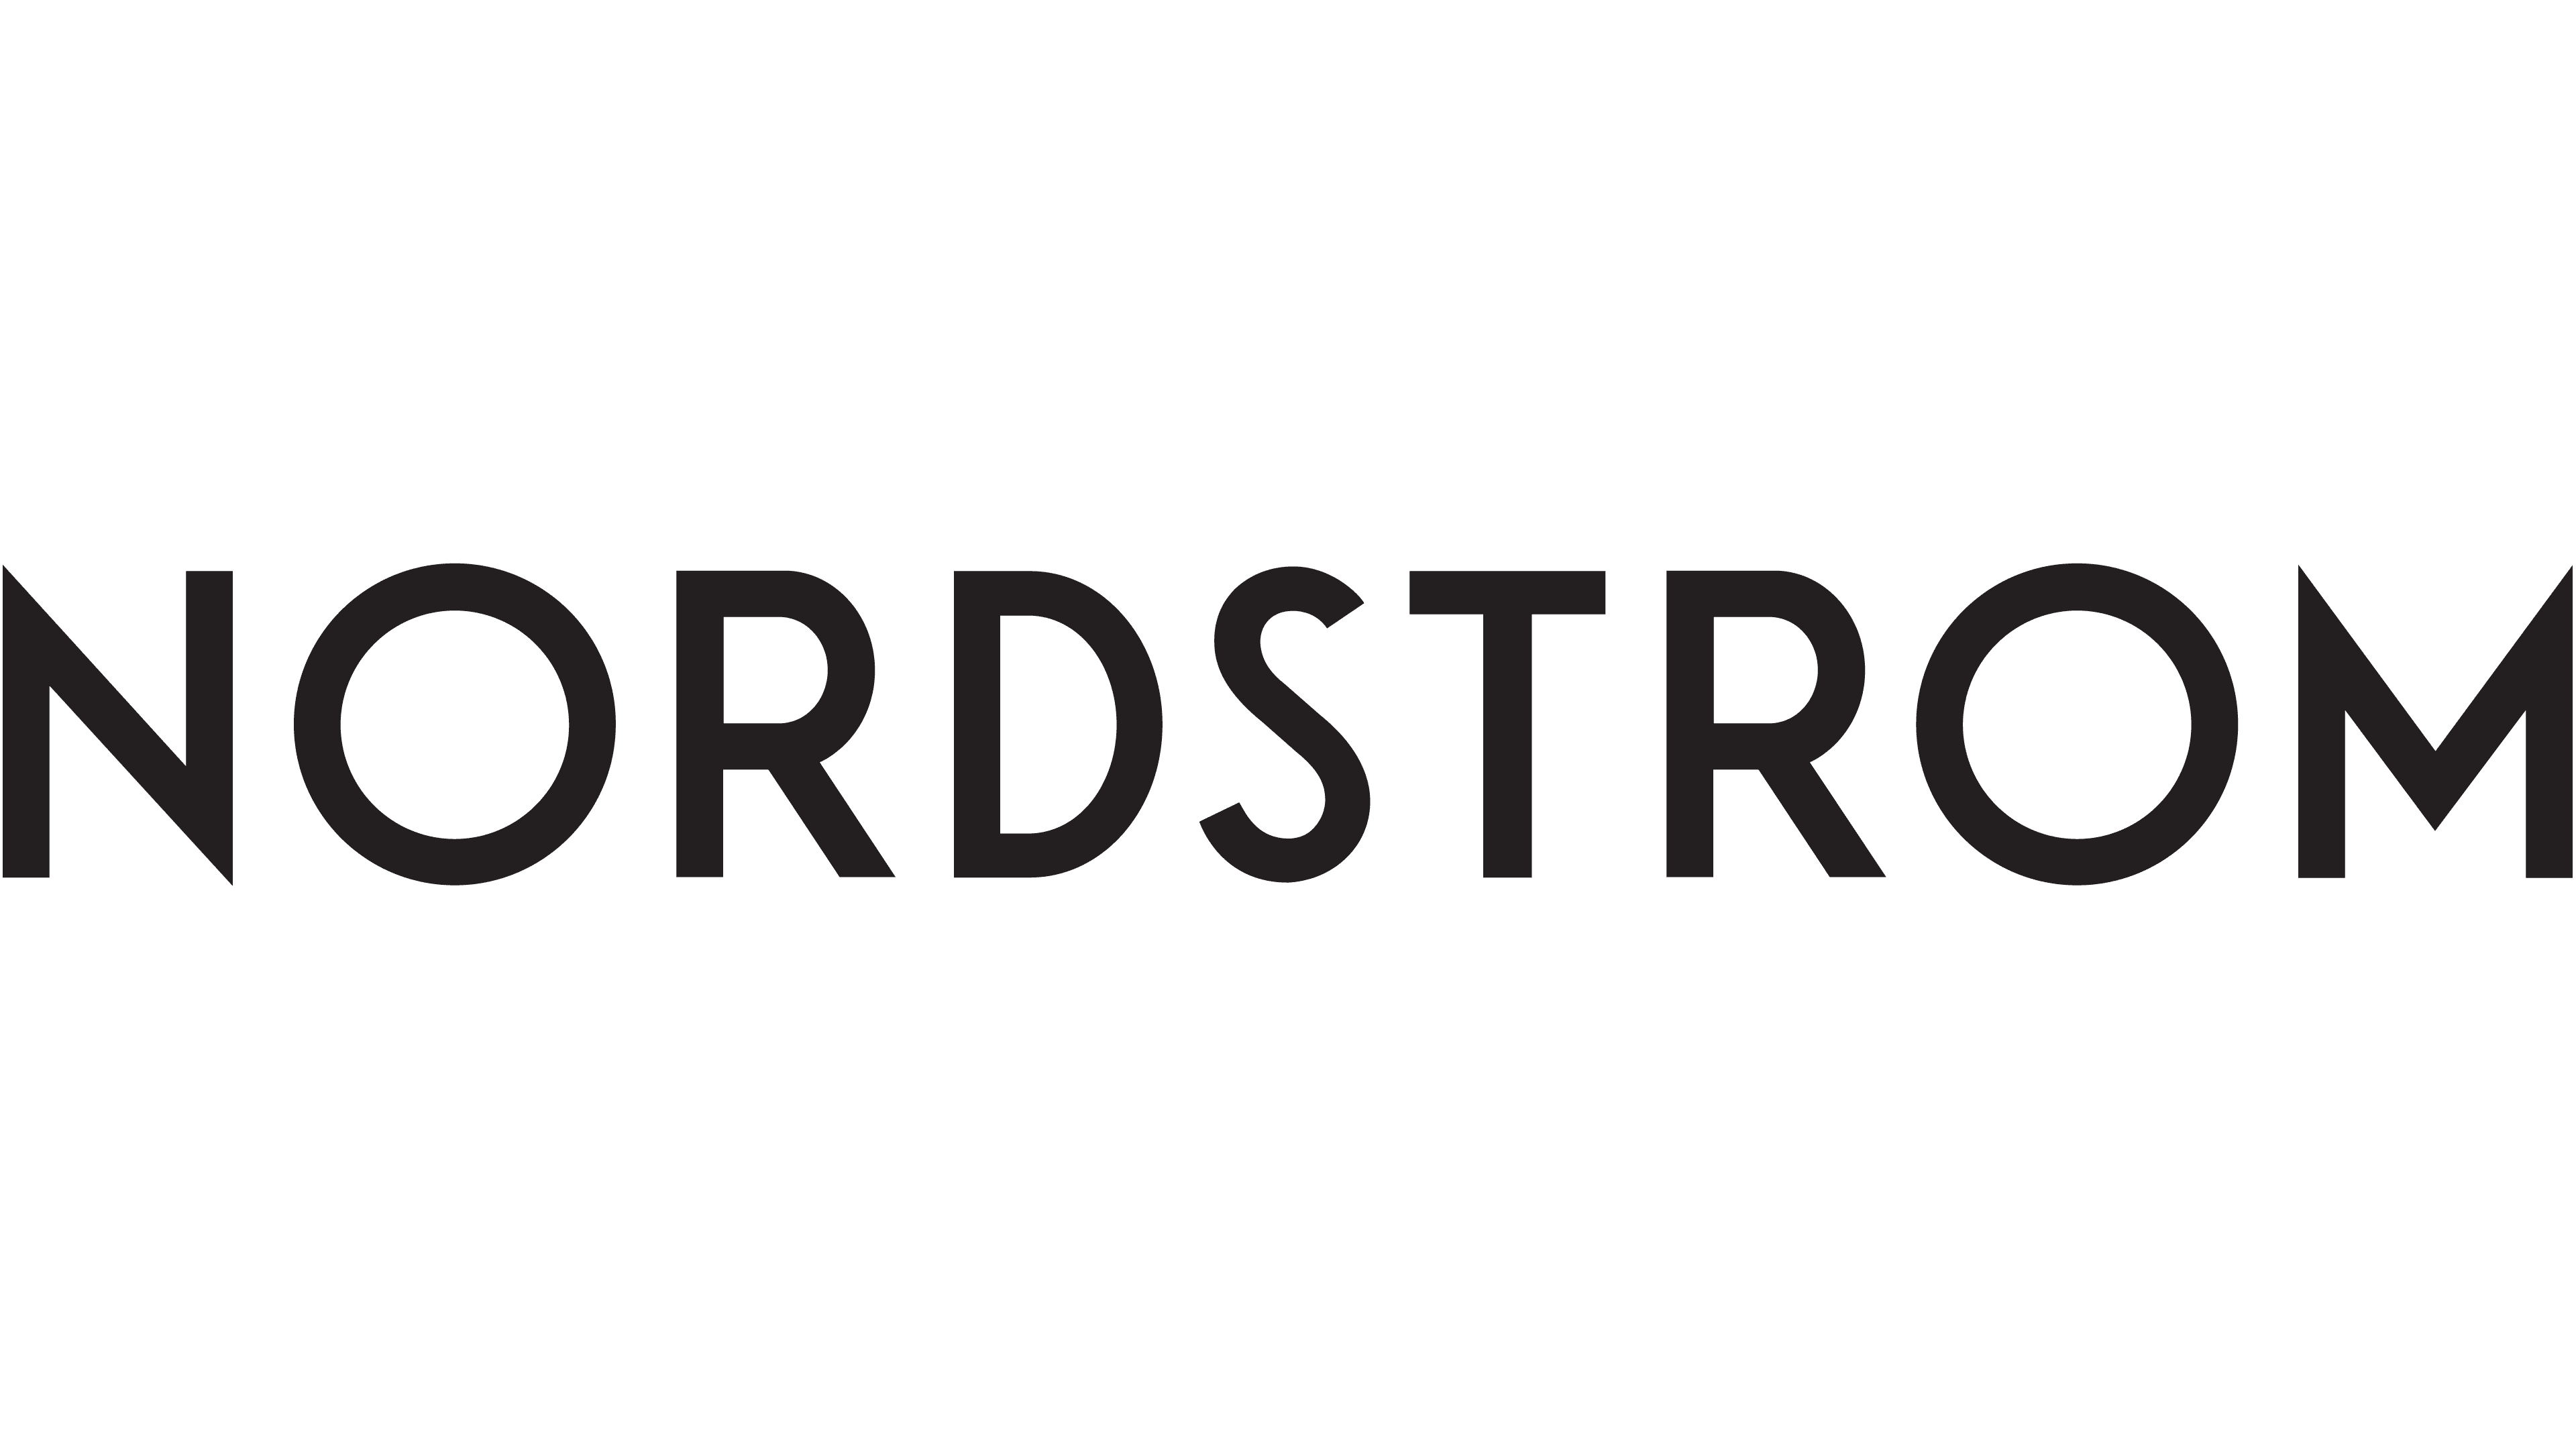 Nordstrom products » Compare prices and see offers now